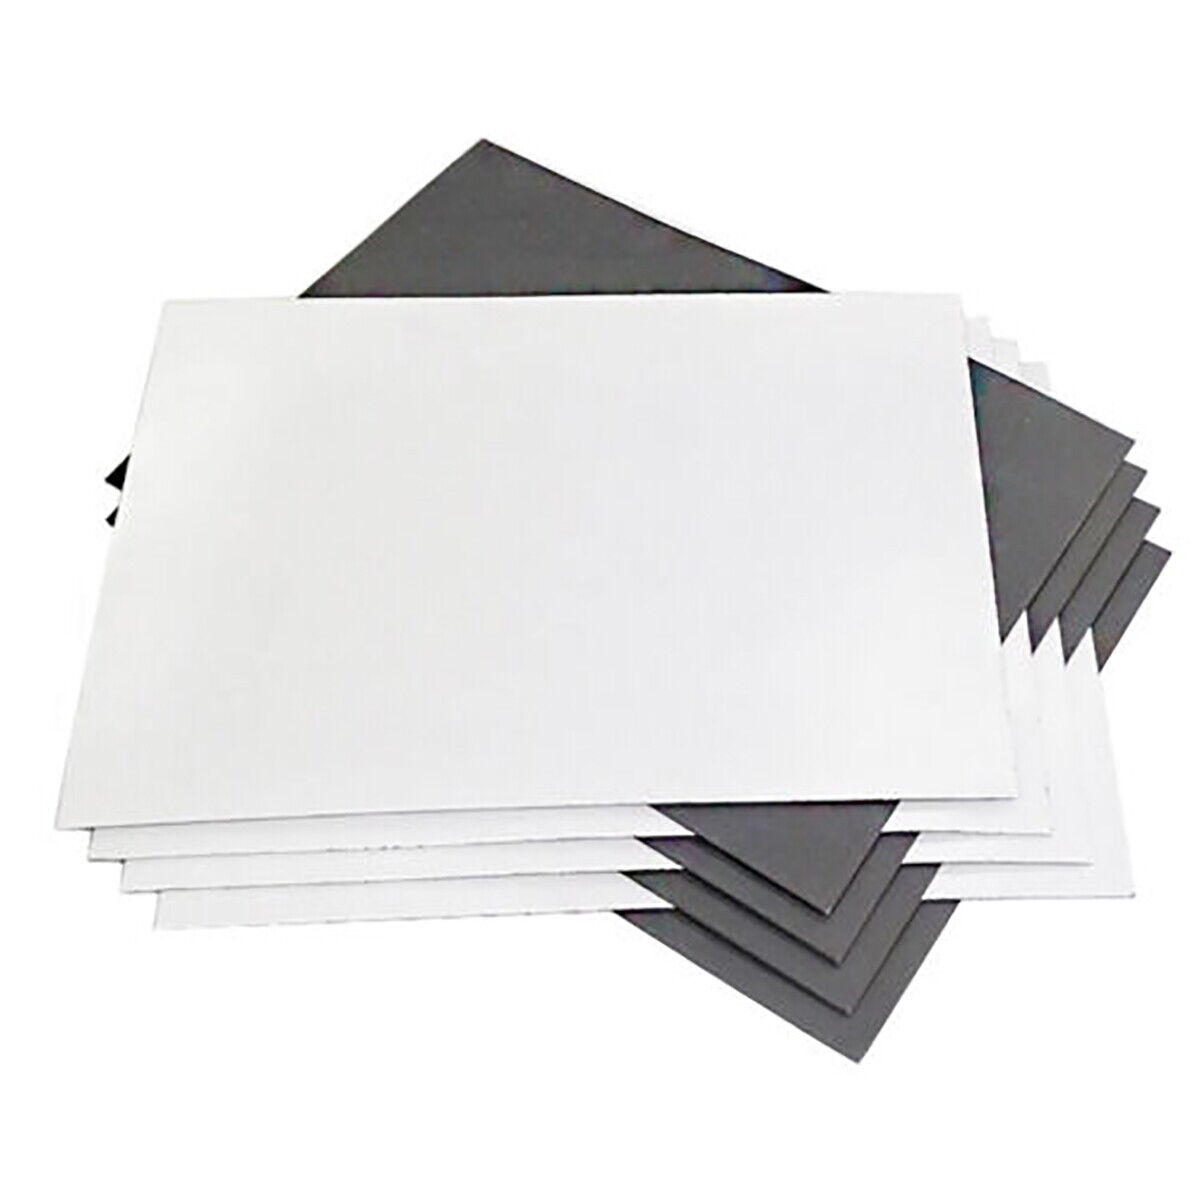 Self-adhesive Magnetic Sheets, Strong Magnetic Sheets, A4 Magnet Sheet